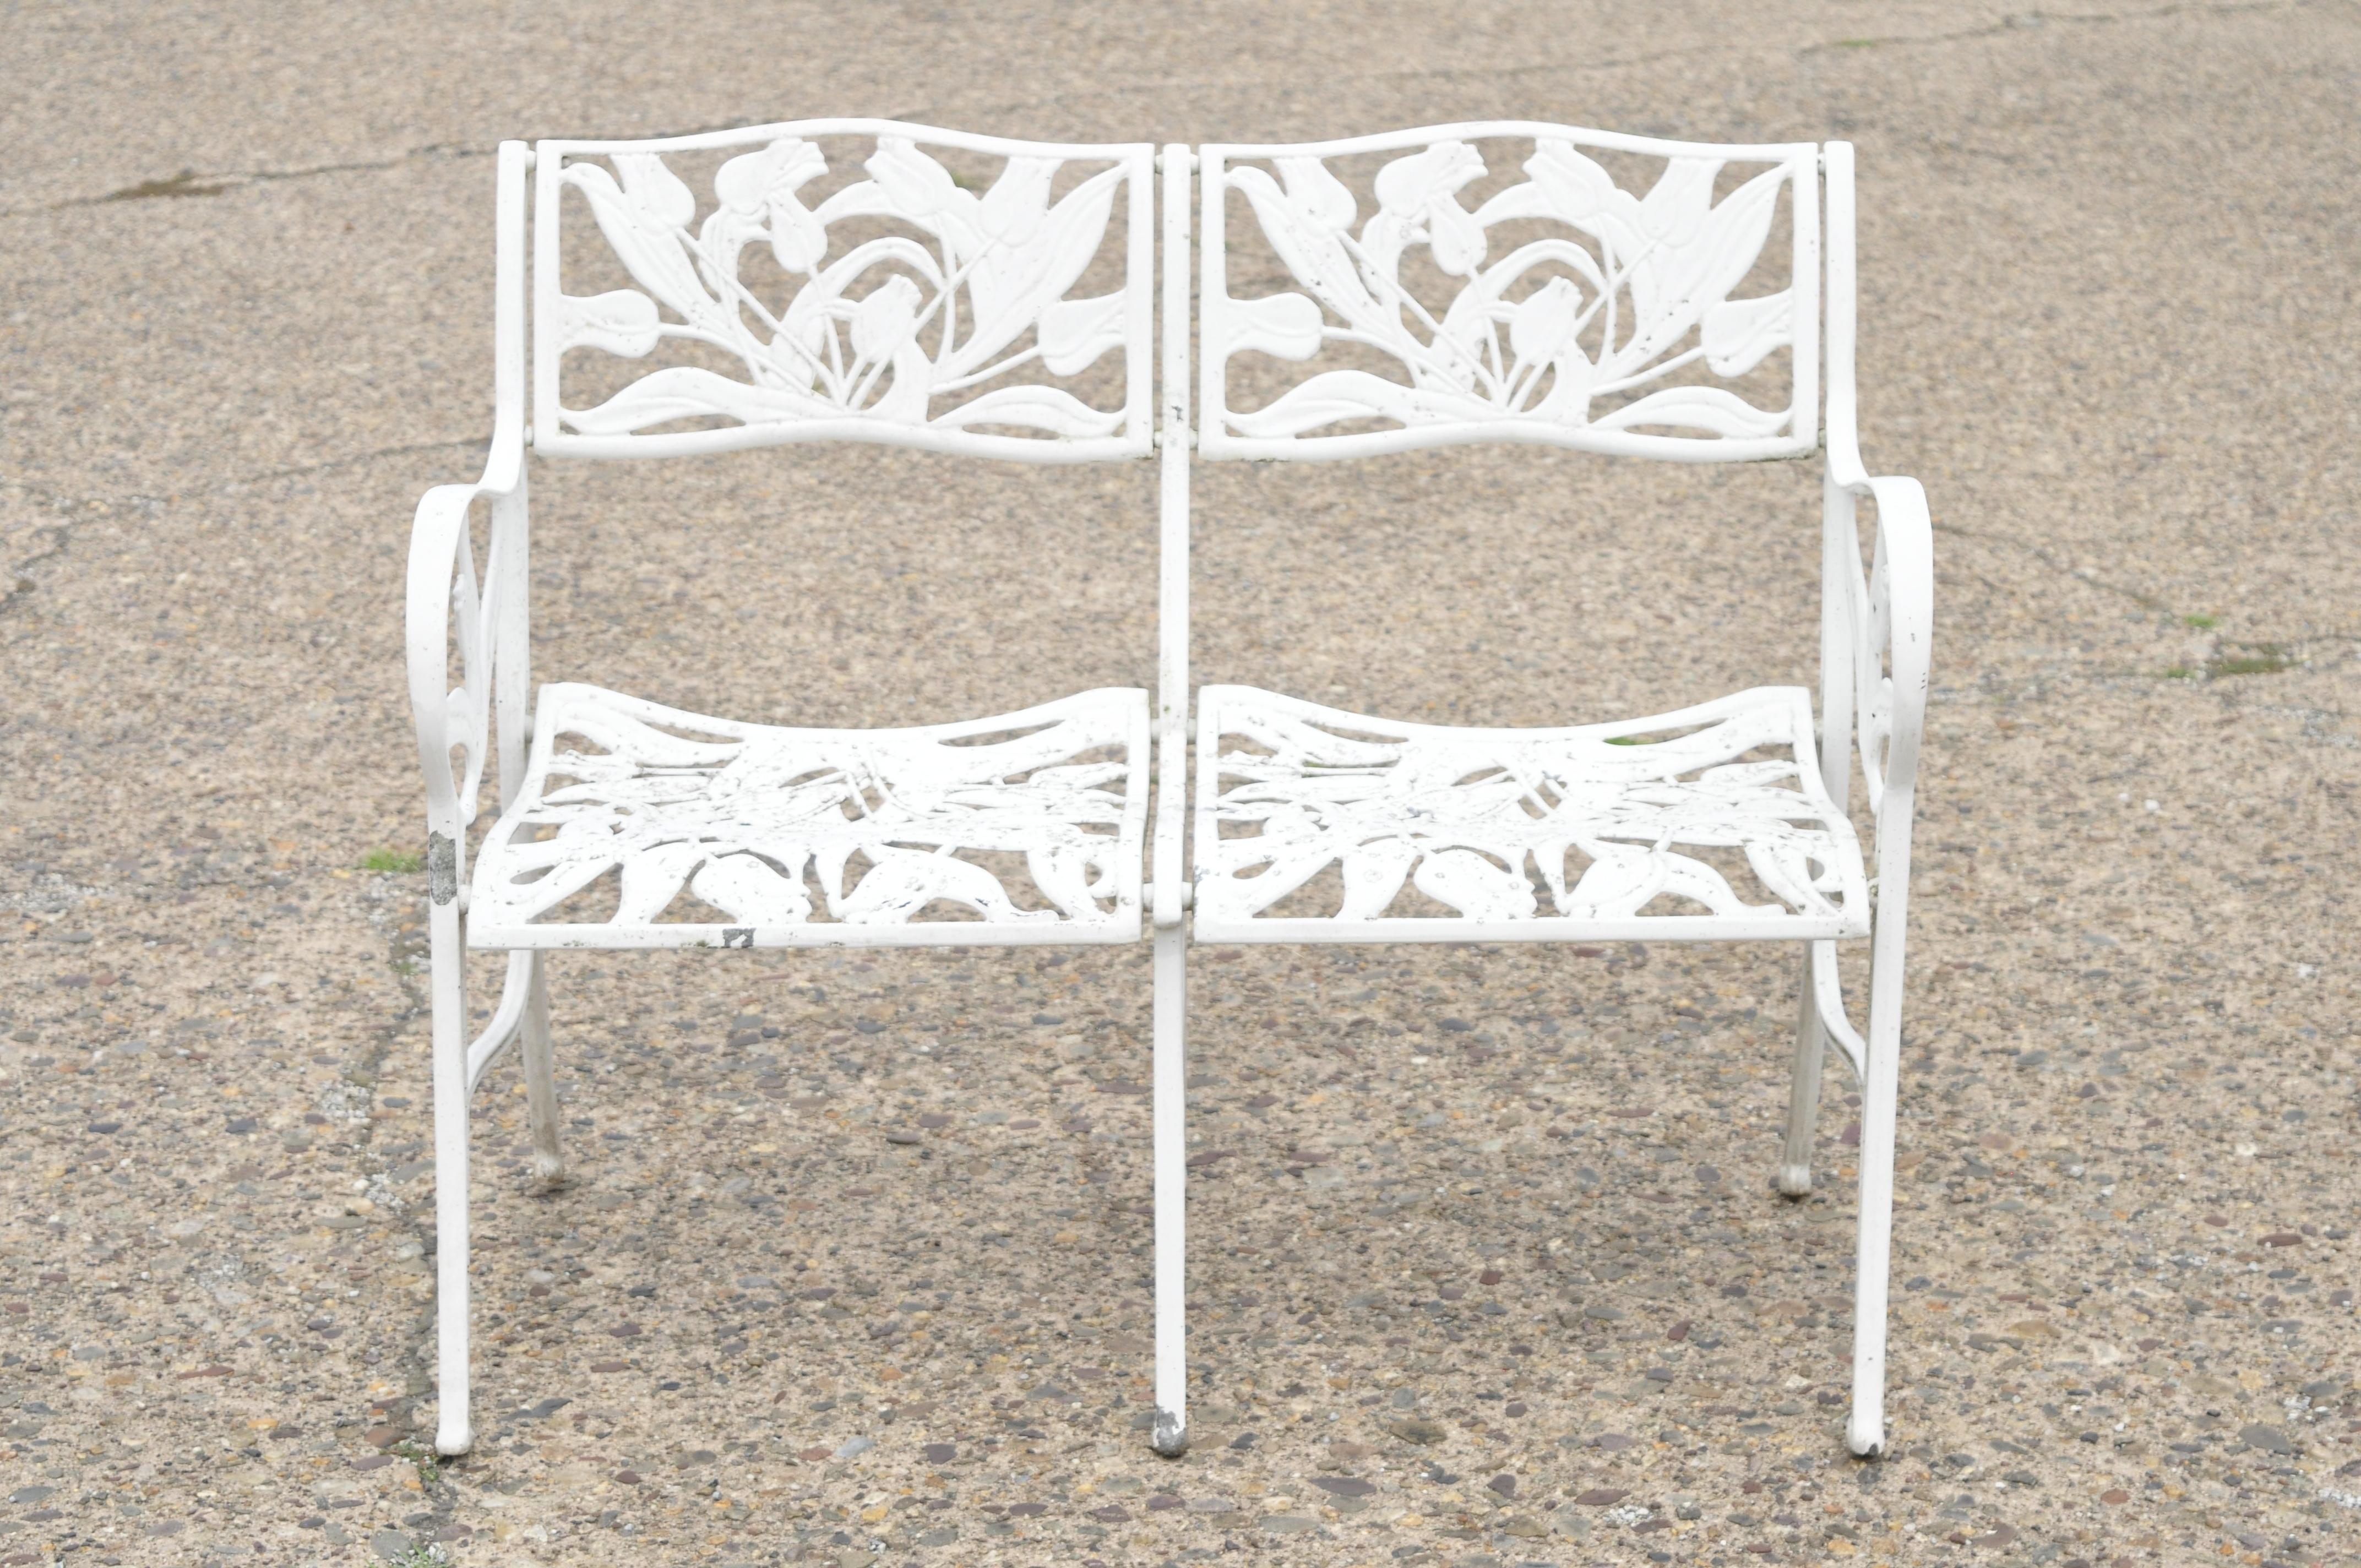 Vintage cast aluminum tulip flower garden patio bench seat attributed to Molla. Item features tulip flower frame, pierce work design, two seats, cast aluminum construction, very nice vintage item, quality craftsmanship, great style and form.